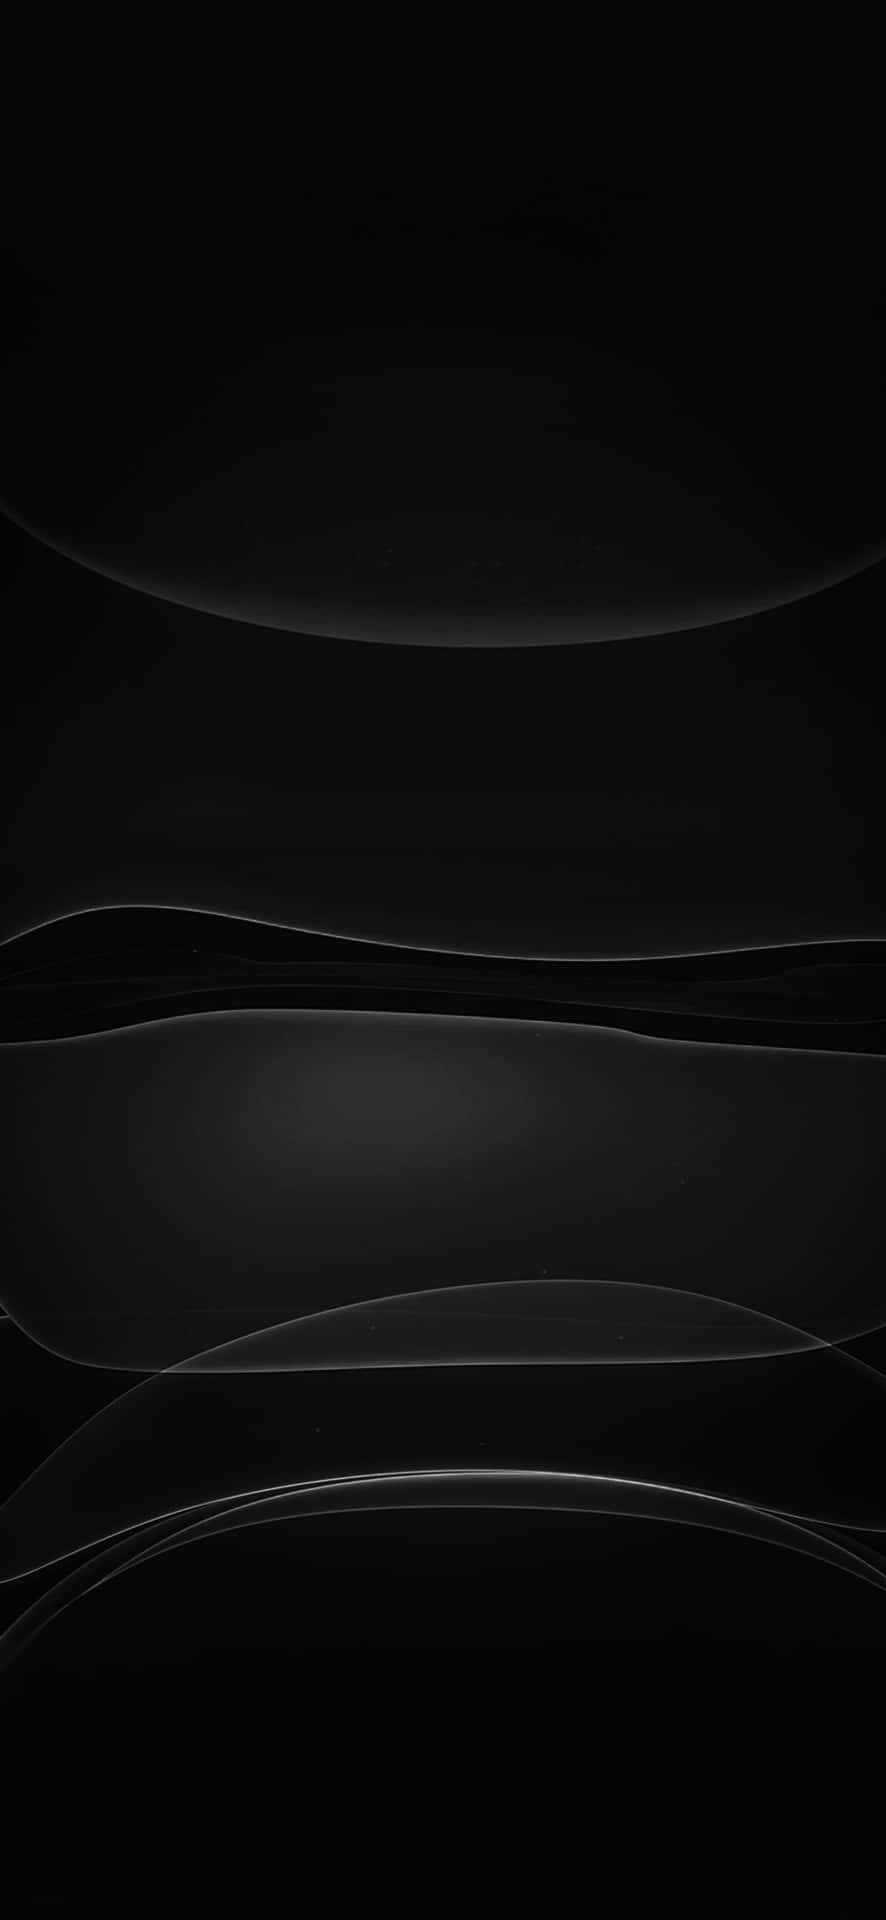 The Latest iPhone with a Dark Finish Wallpaper